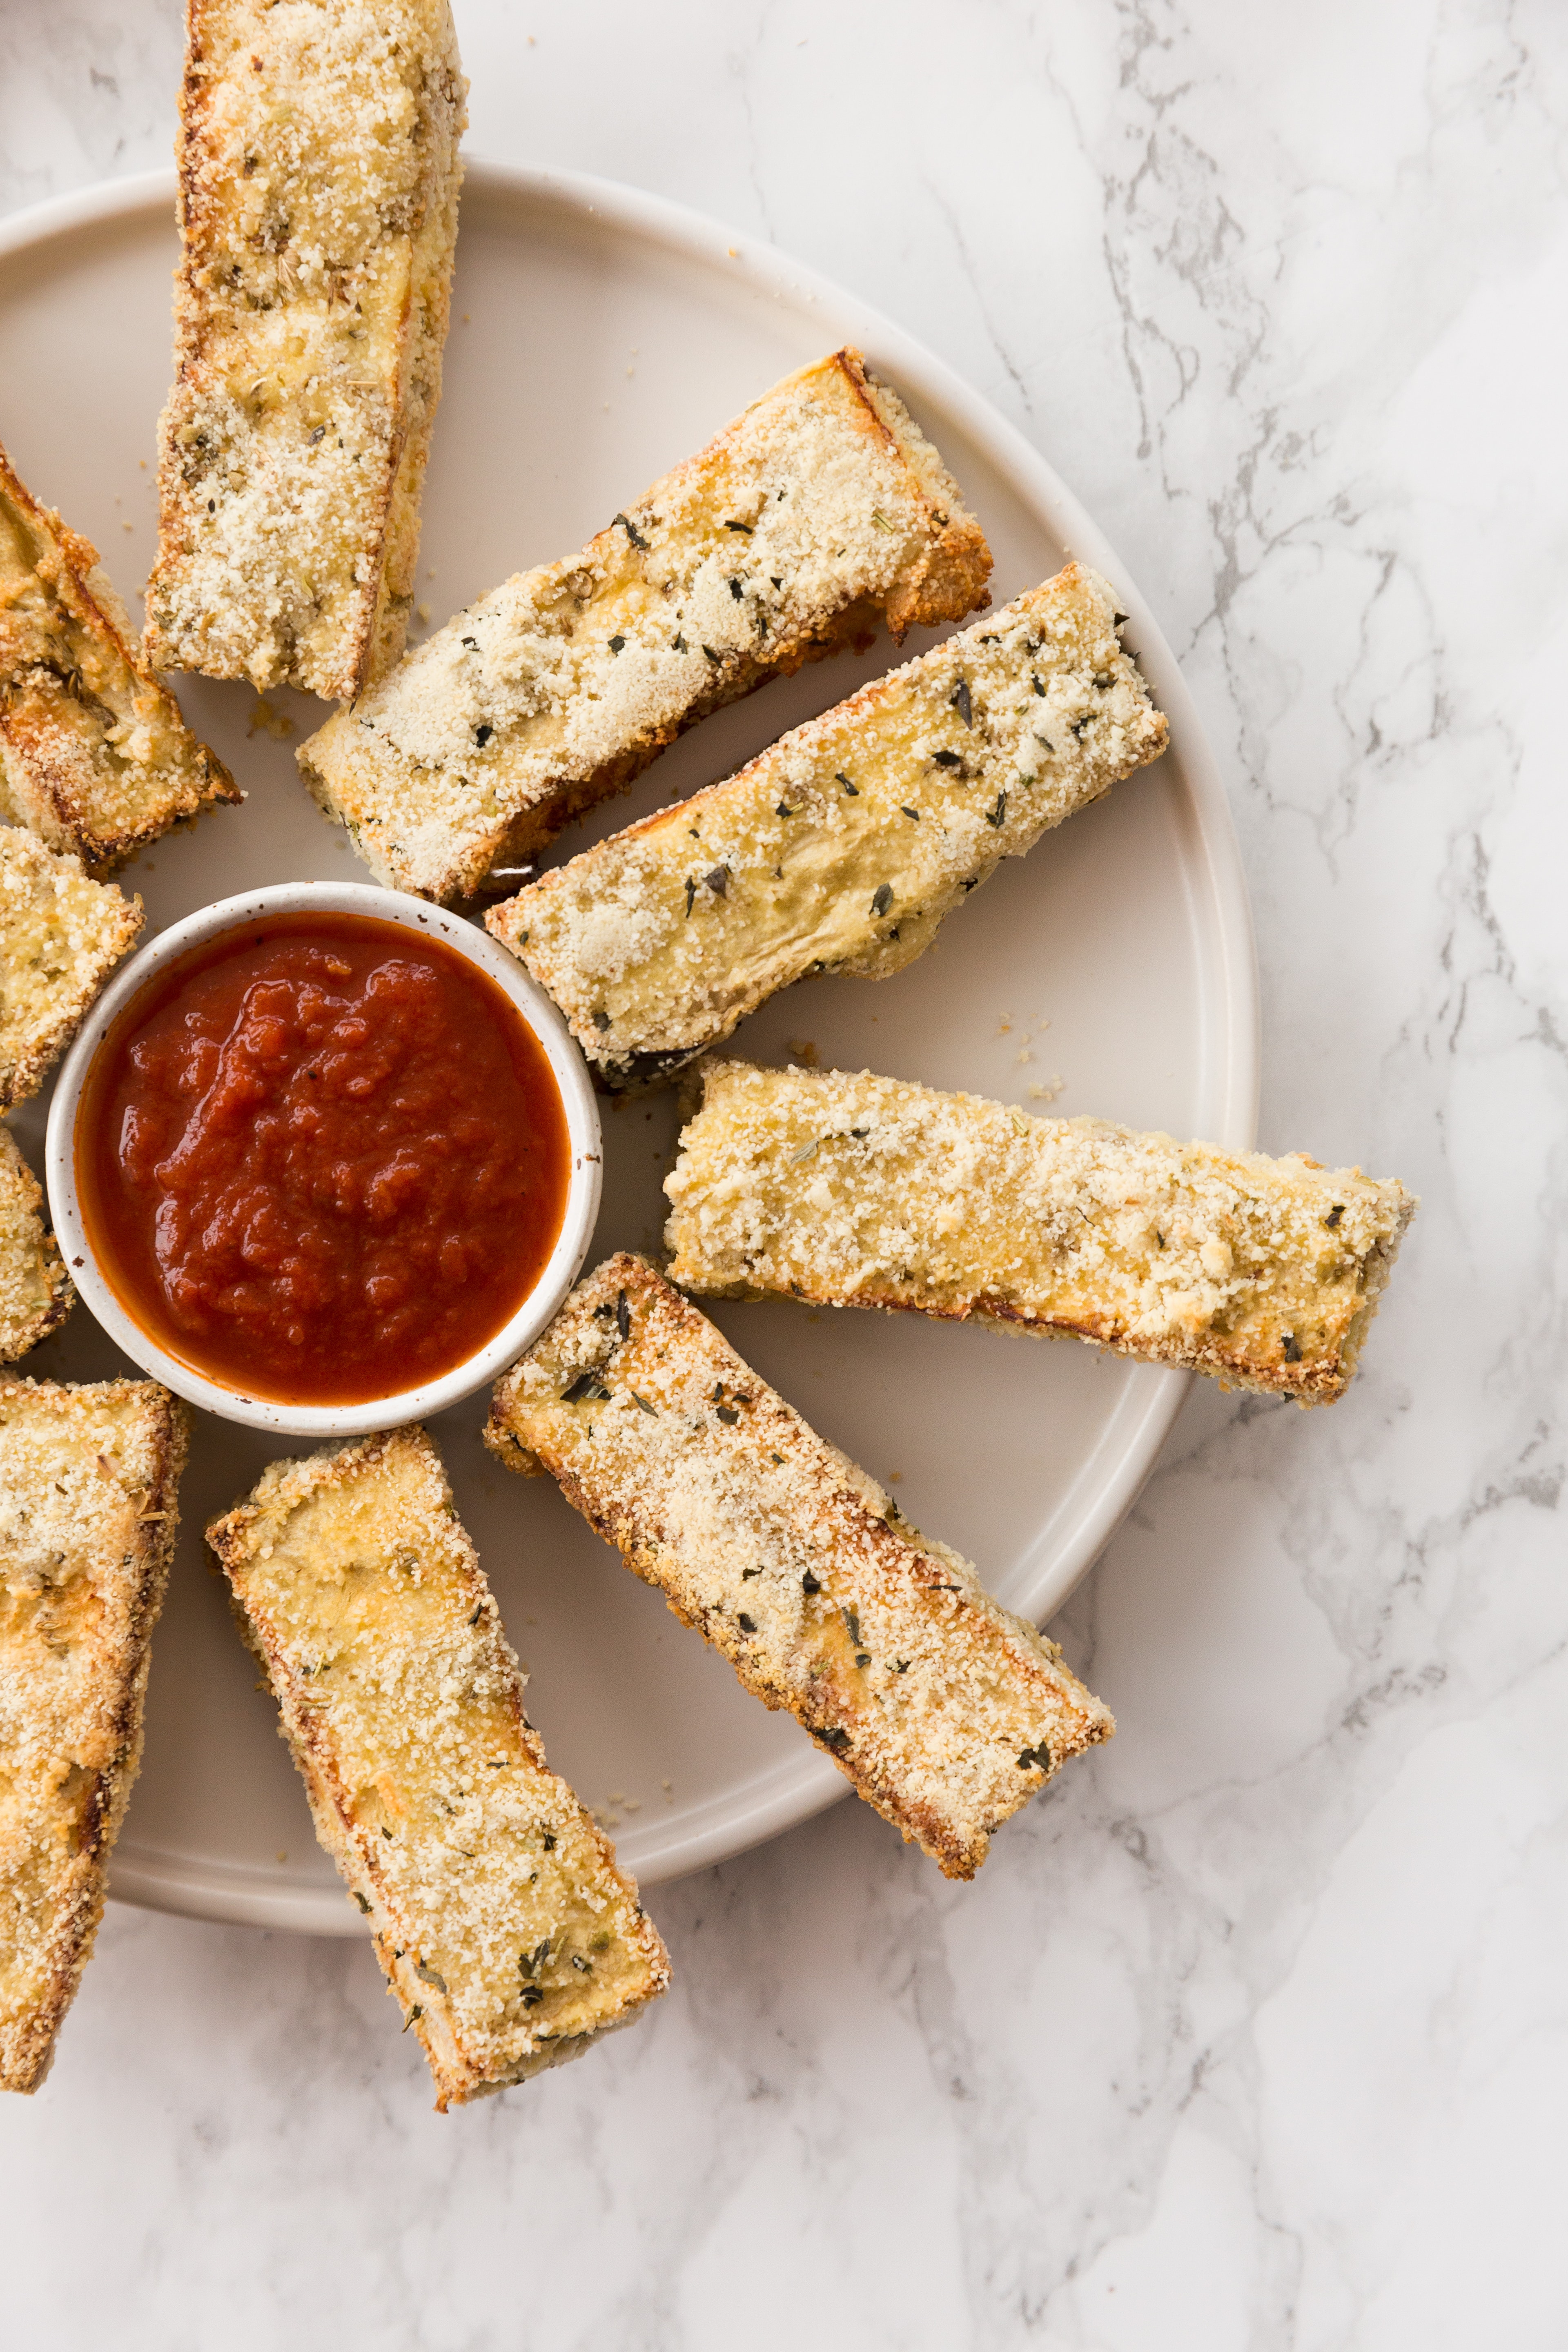 Oven Baked Eggplant Fries